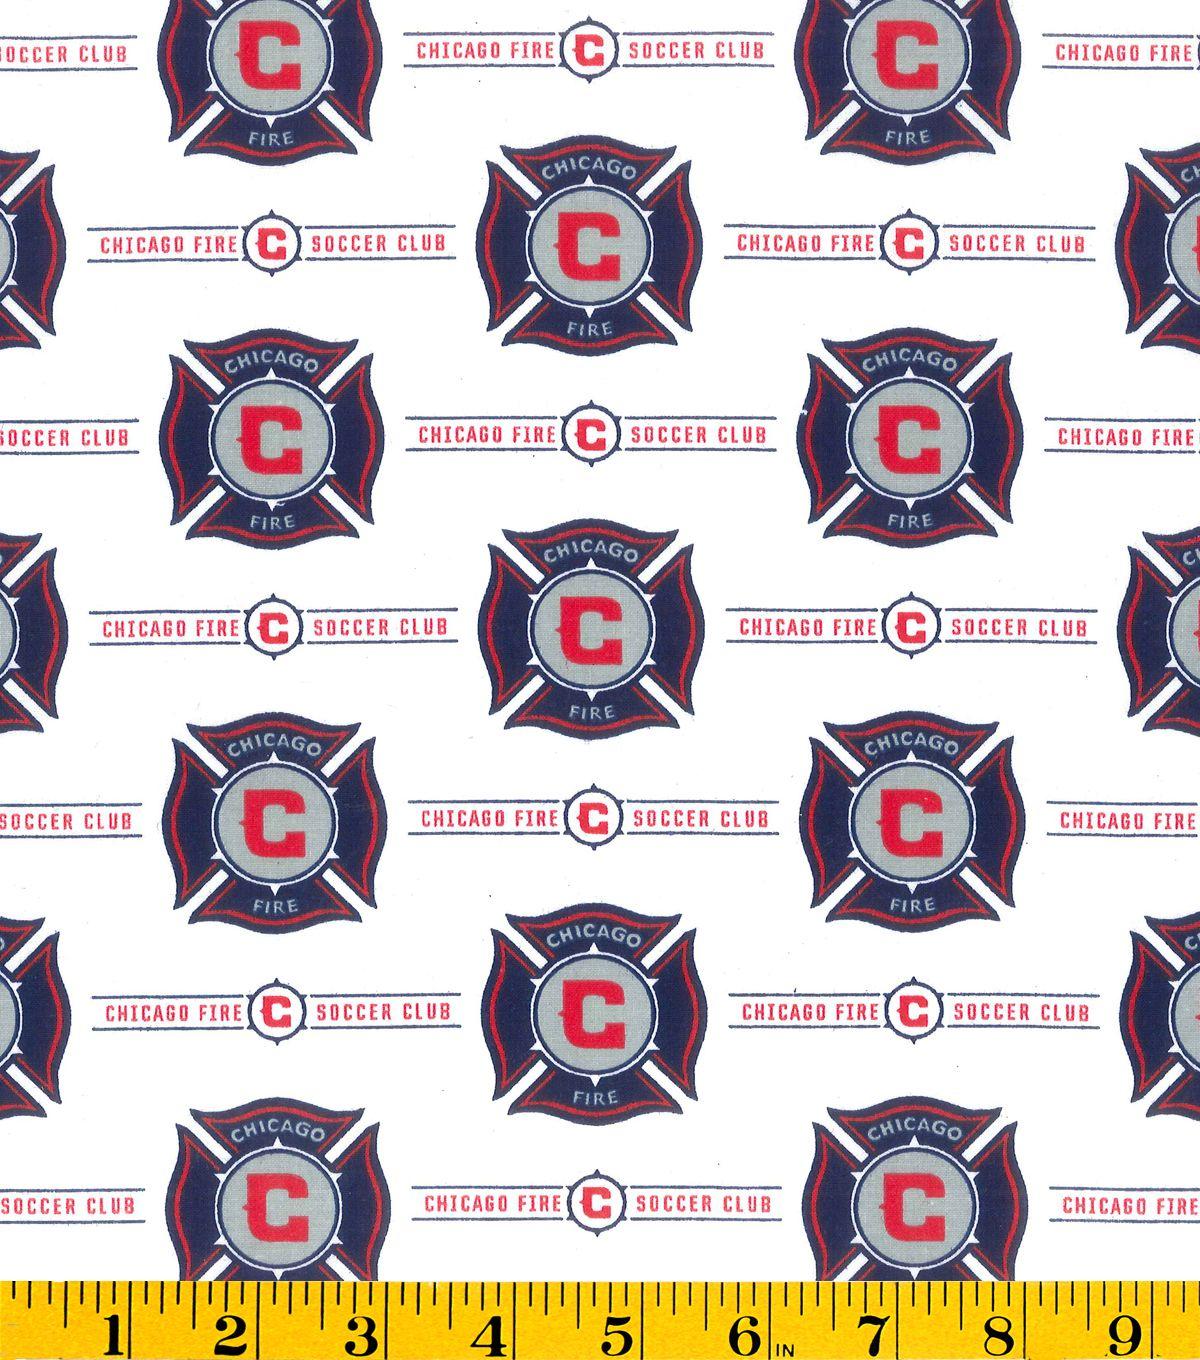 Chicago Fire Soccer Logo - Chicago Fire Soccer Club MLS Cotton Fabric